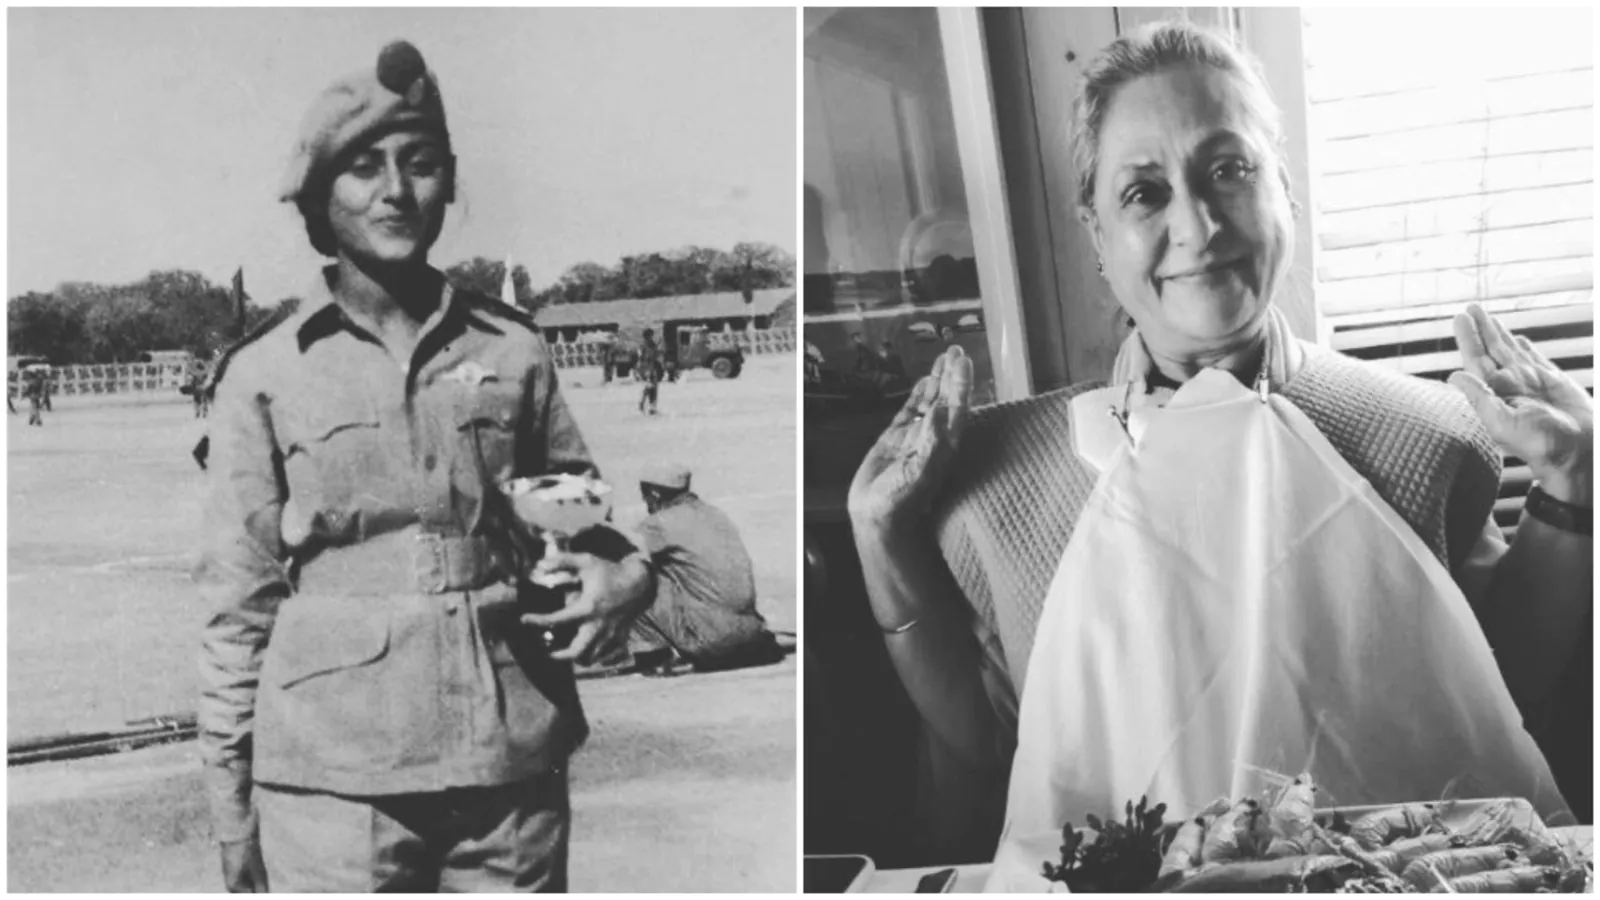 Shweta Bachchan shares pic of Jaya Bachchan from her NCC days and a rare goofy one too. See here